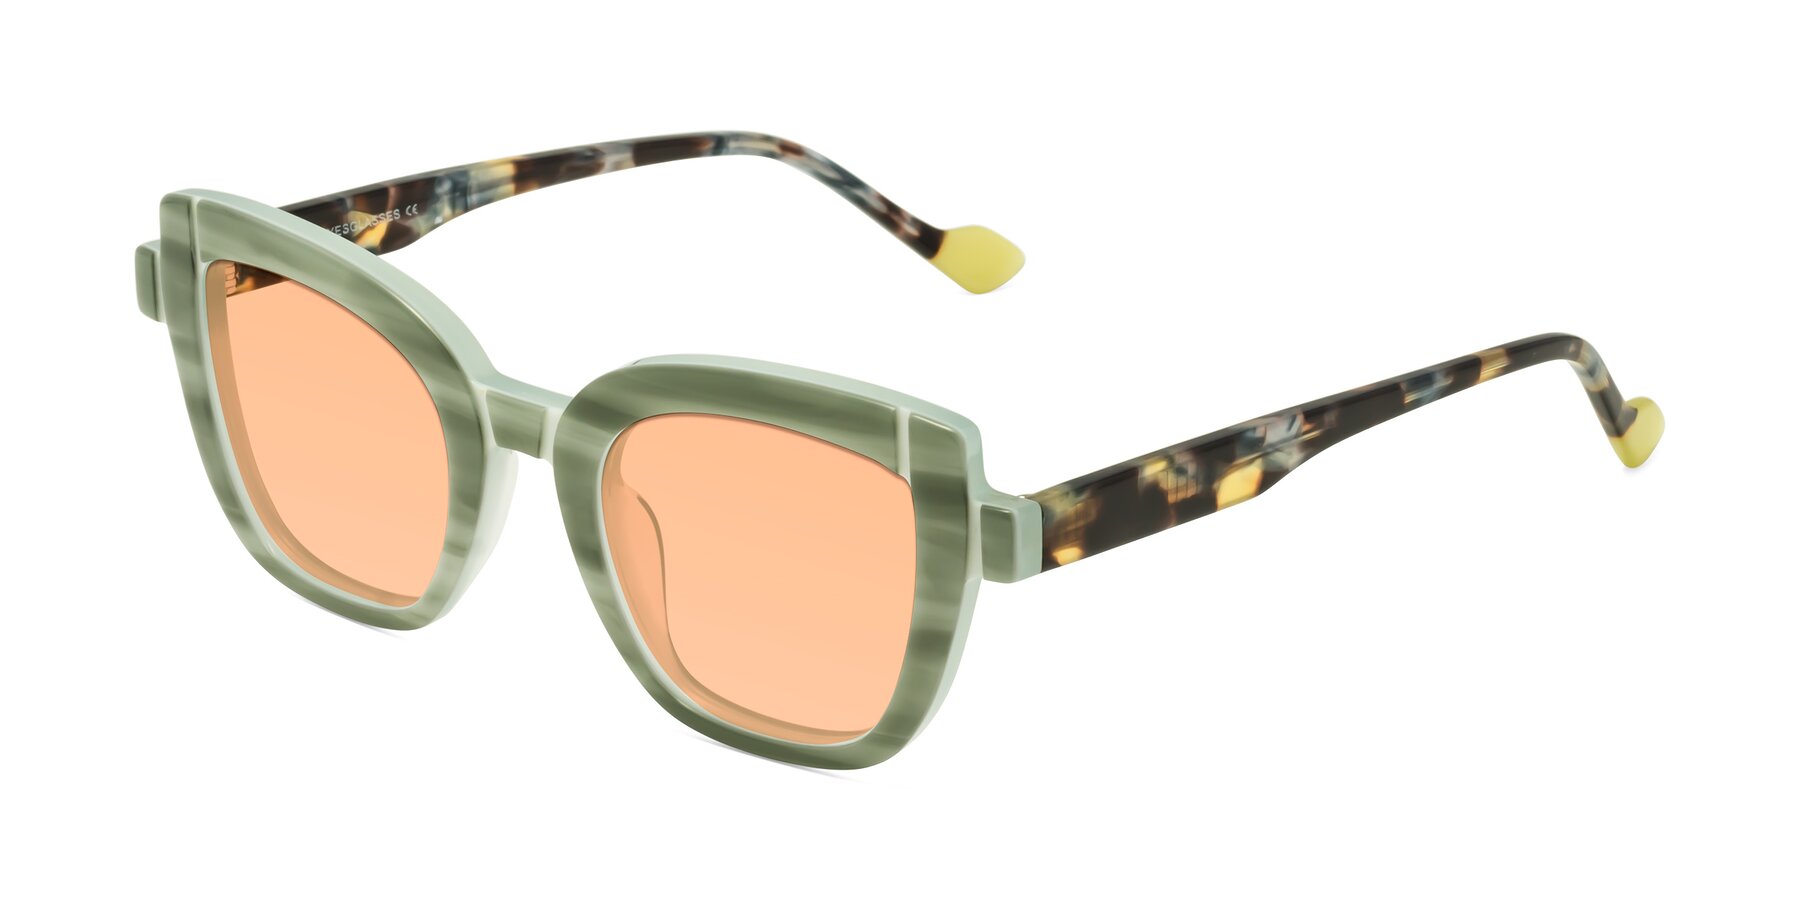 Angle of Sato in Stripe Green with Light Orange Tinted Lenses